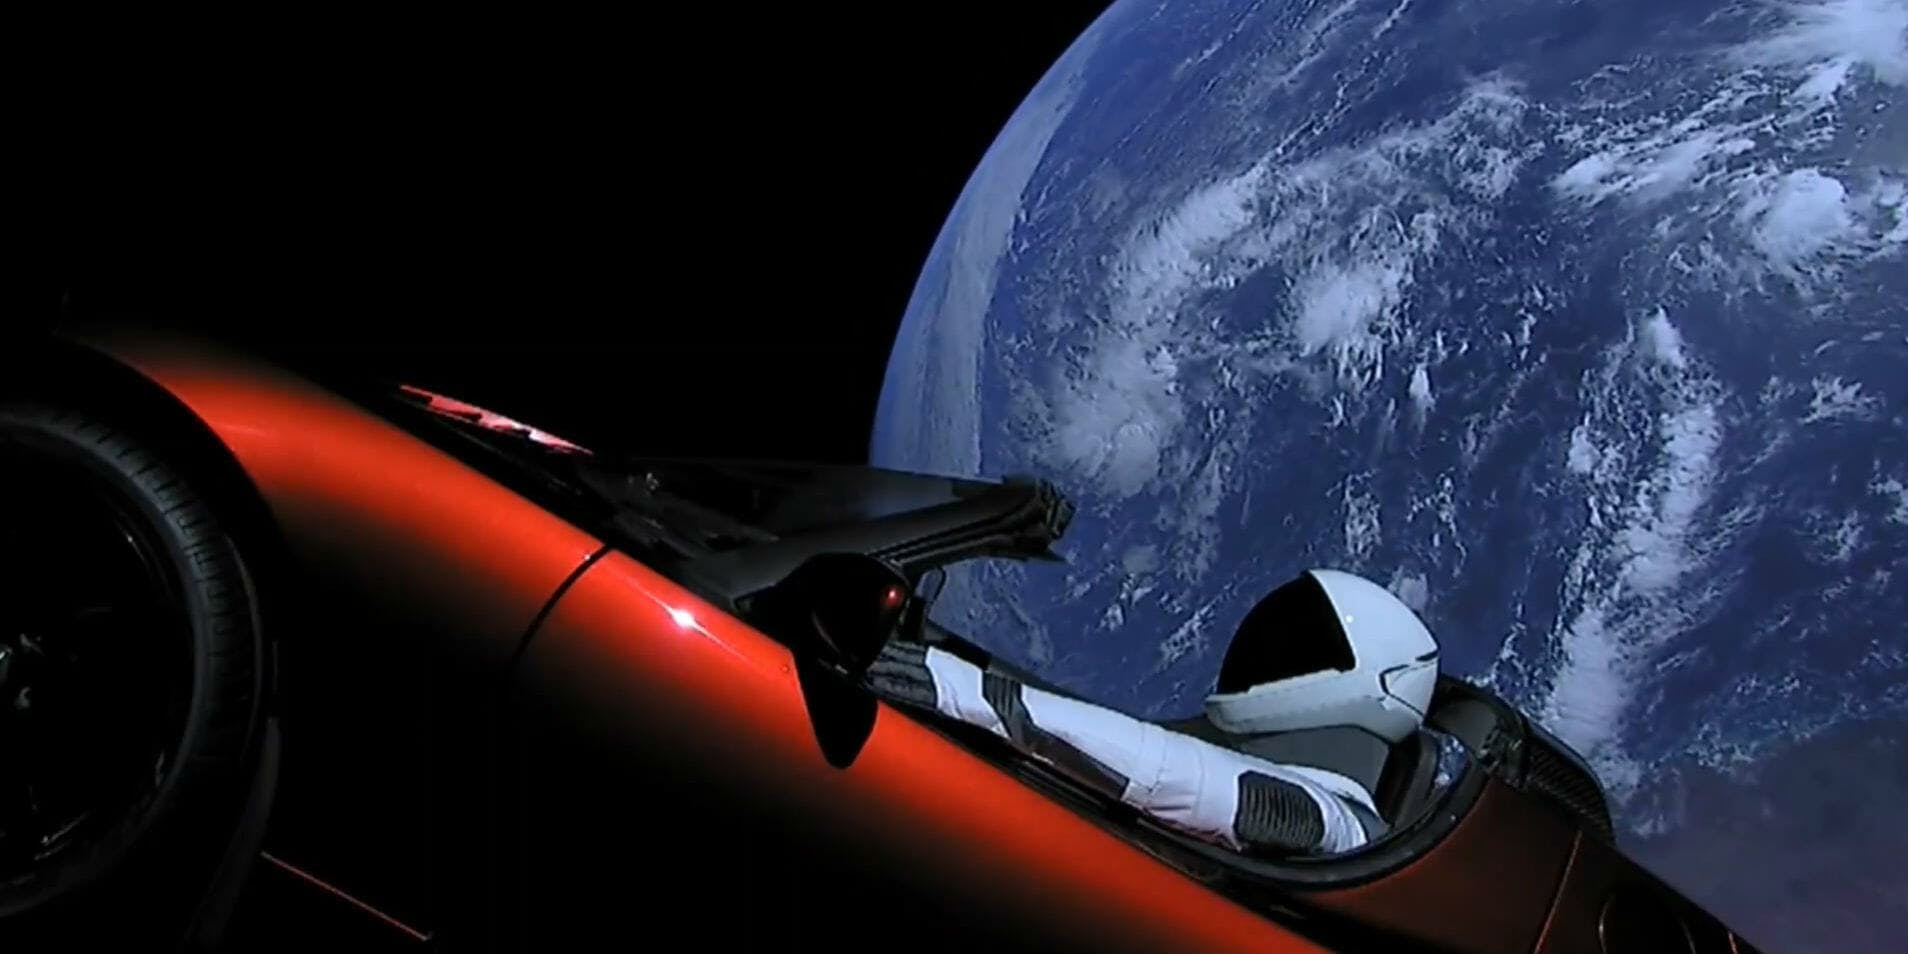 Watch a Livestream of Musk's Tesla Floating Through Space